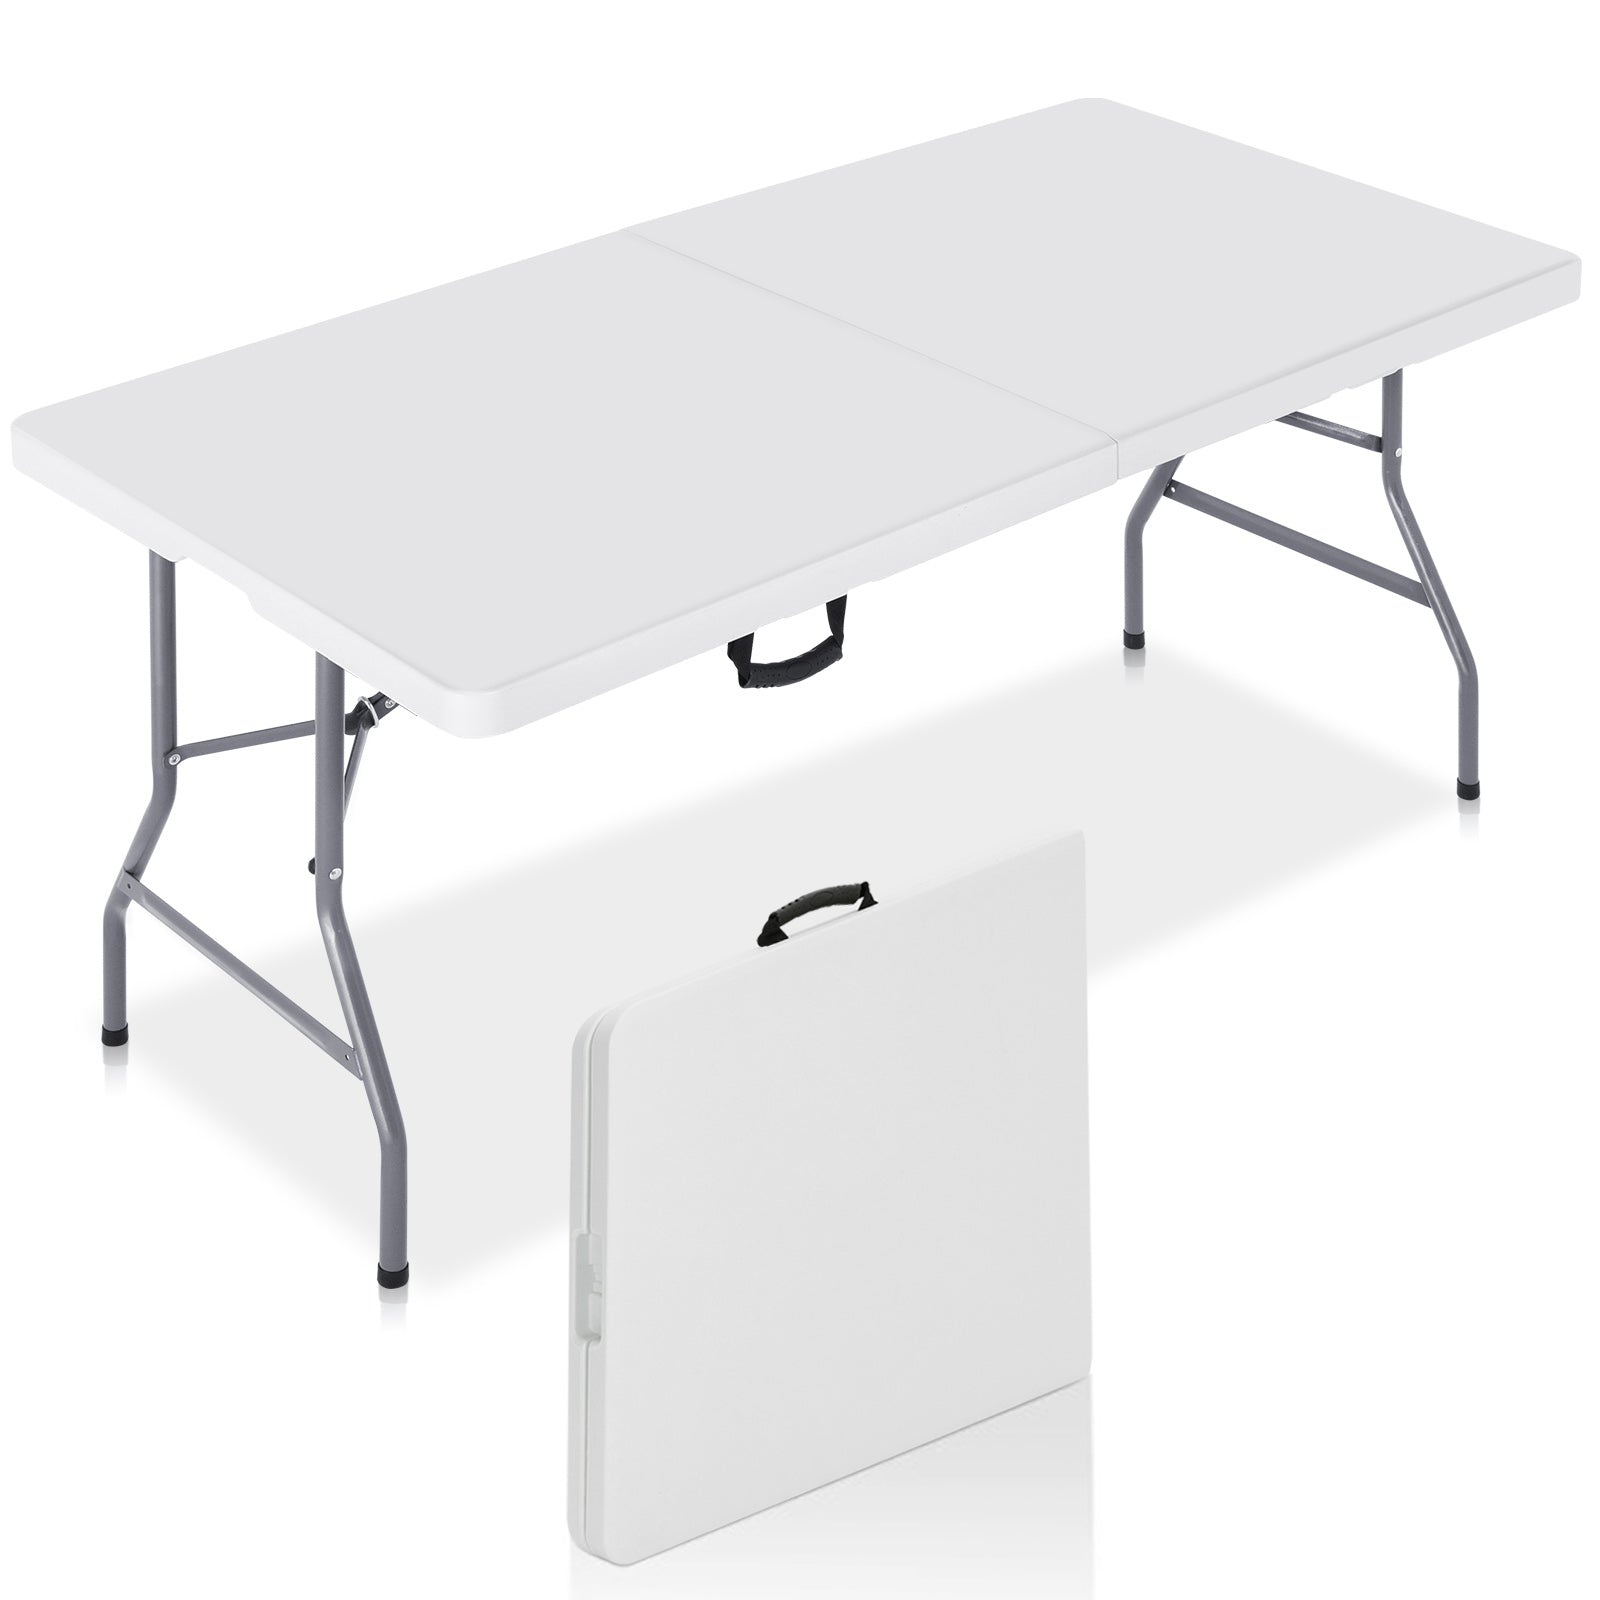 Plastic Folding Picnic Table Indoor Outdoor